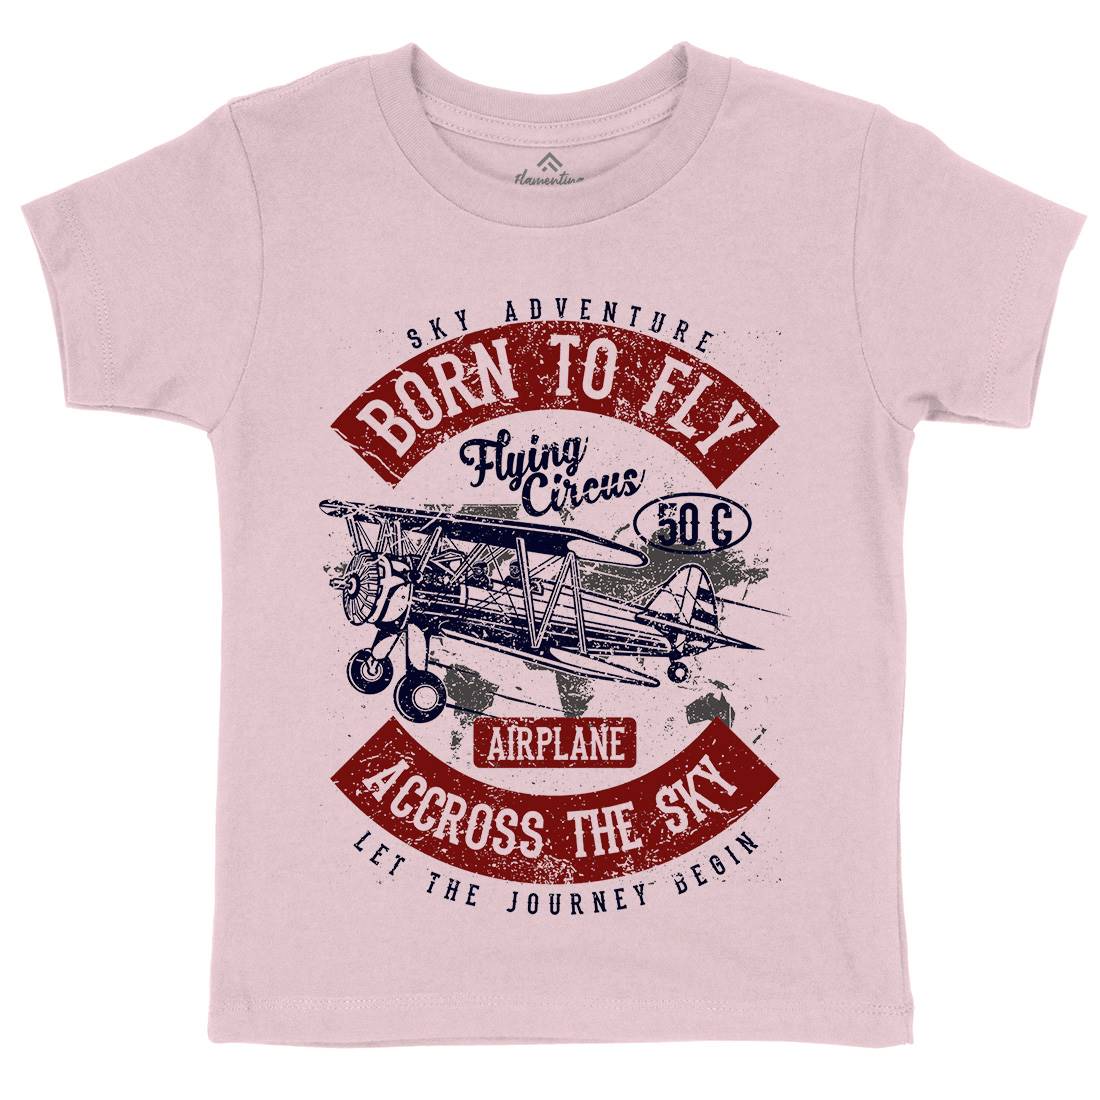 Born To Fly Kids Crew Neck T-Shirt Vehicles A019